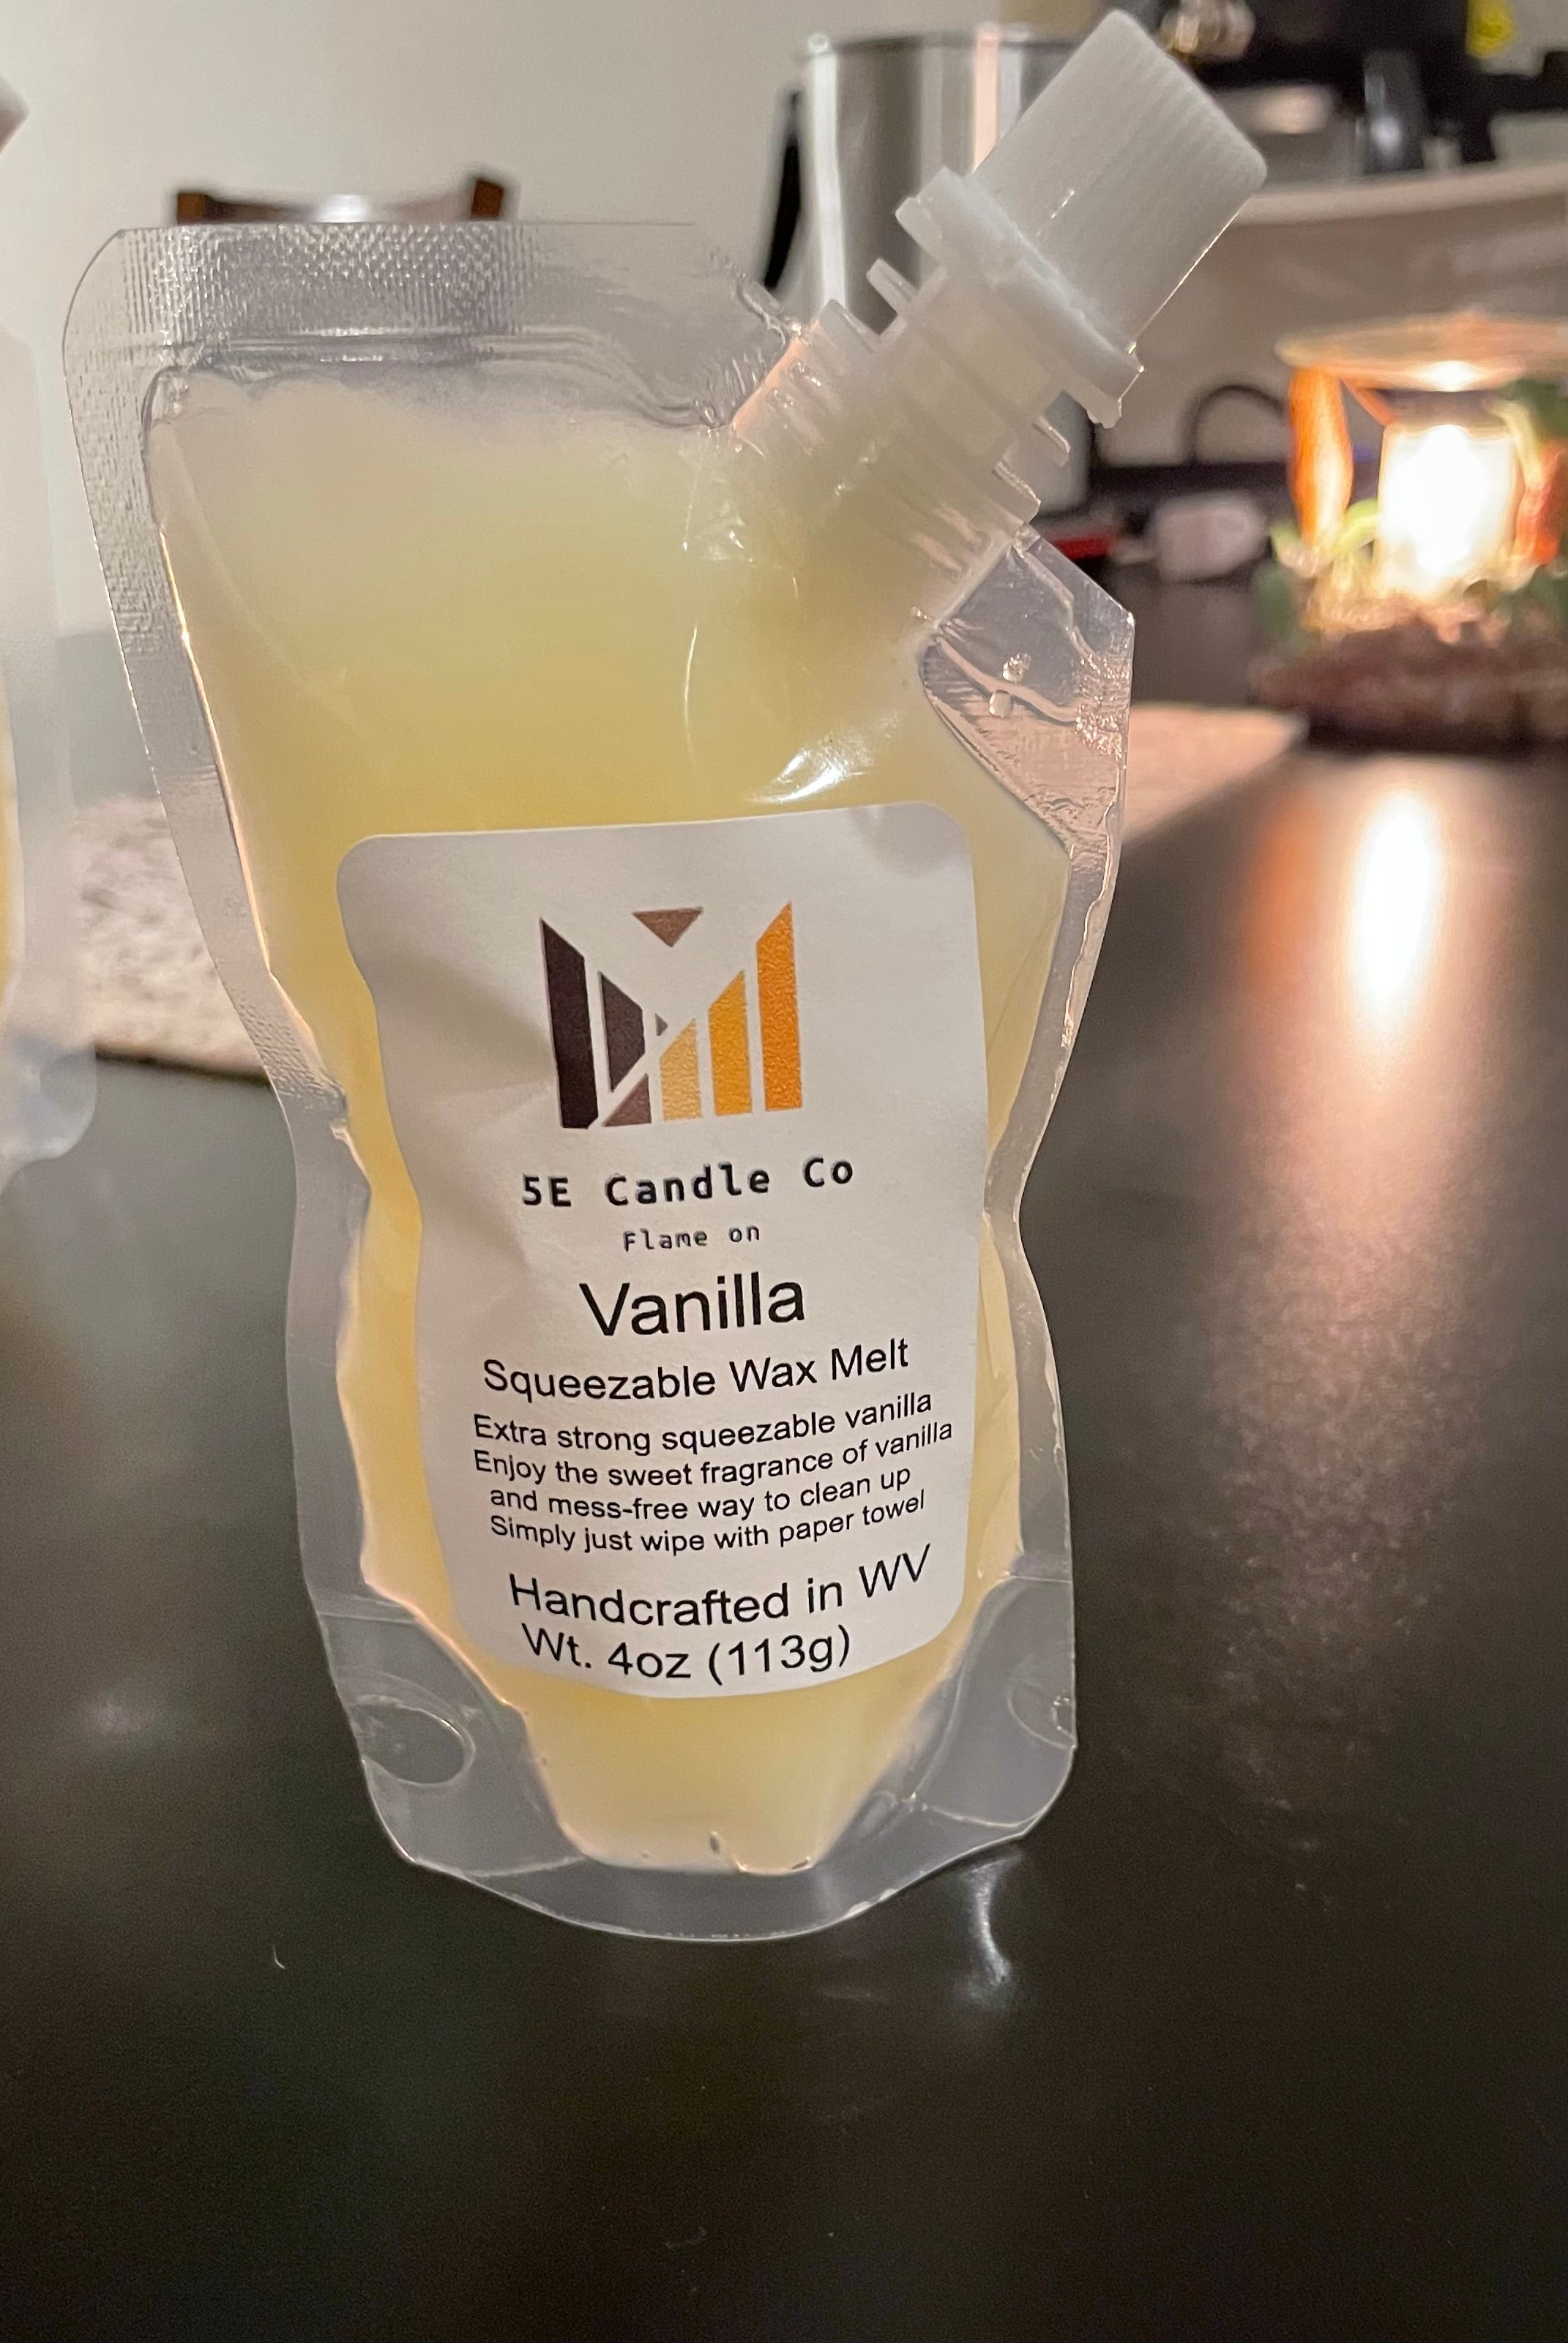 Vanilla 4oz squeezable wax melt (extremely strong)